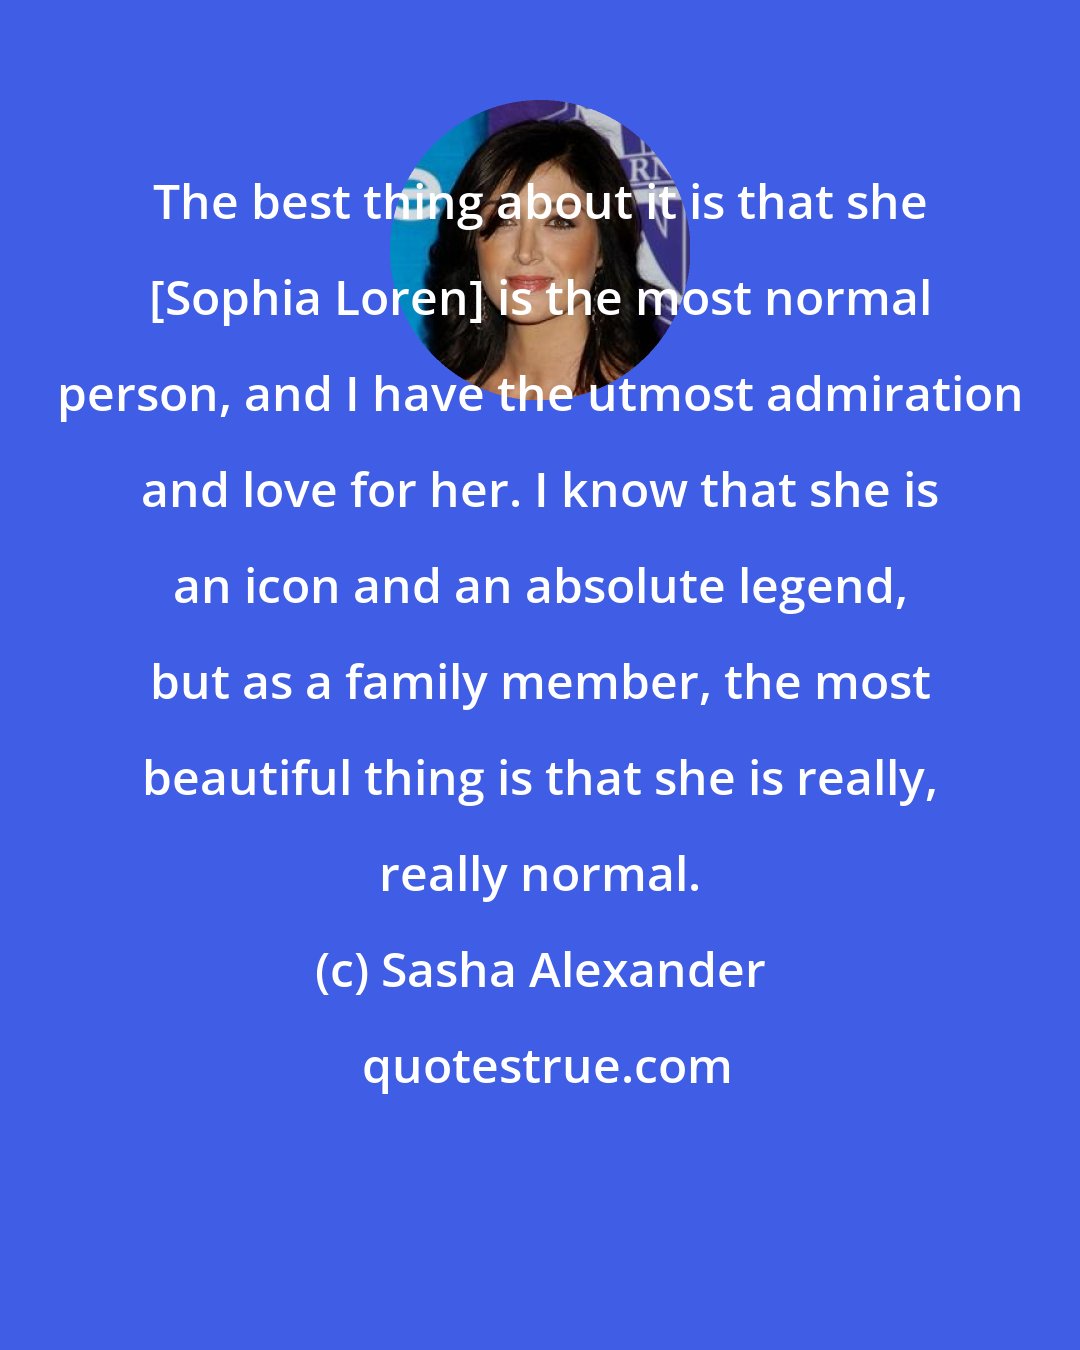 Sasha Alexander: The best thing about it is that she [Sophia Loren] is the most normal person, and I have the utmost admiration and love for her. I know that she is an icon and an absolute legend, but as a family member, the most beautiful thing is that she is really, really normal.